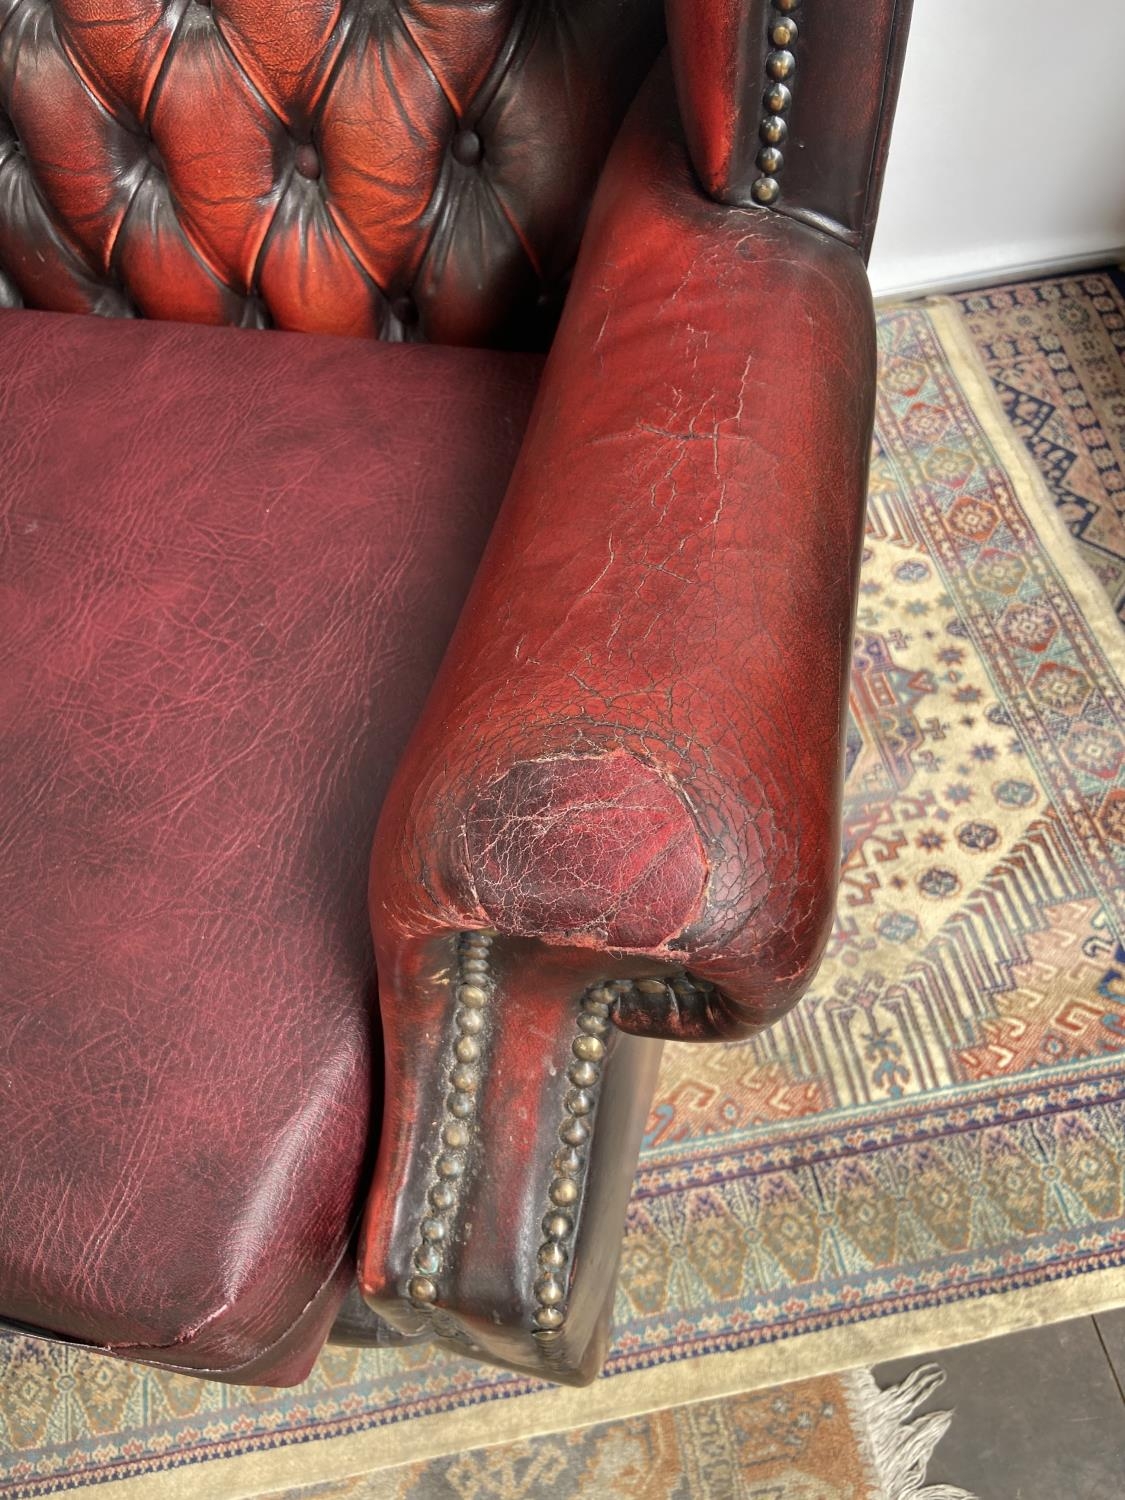 Antique chesterfield oxblood red gull wing arm chair. [107cm in height] - Image 2 of 7